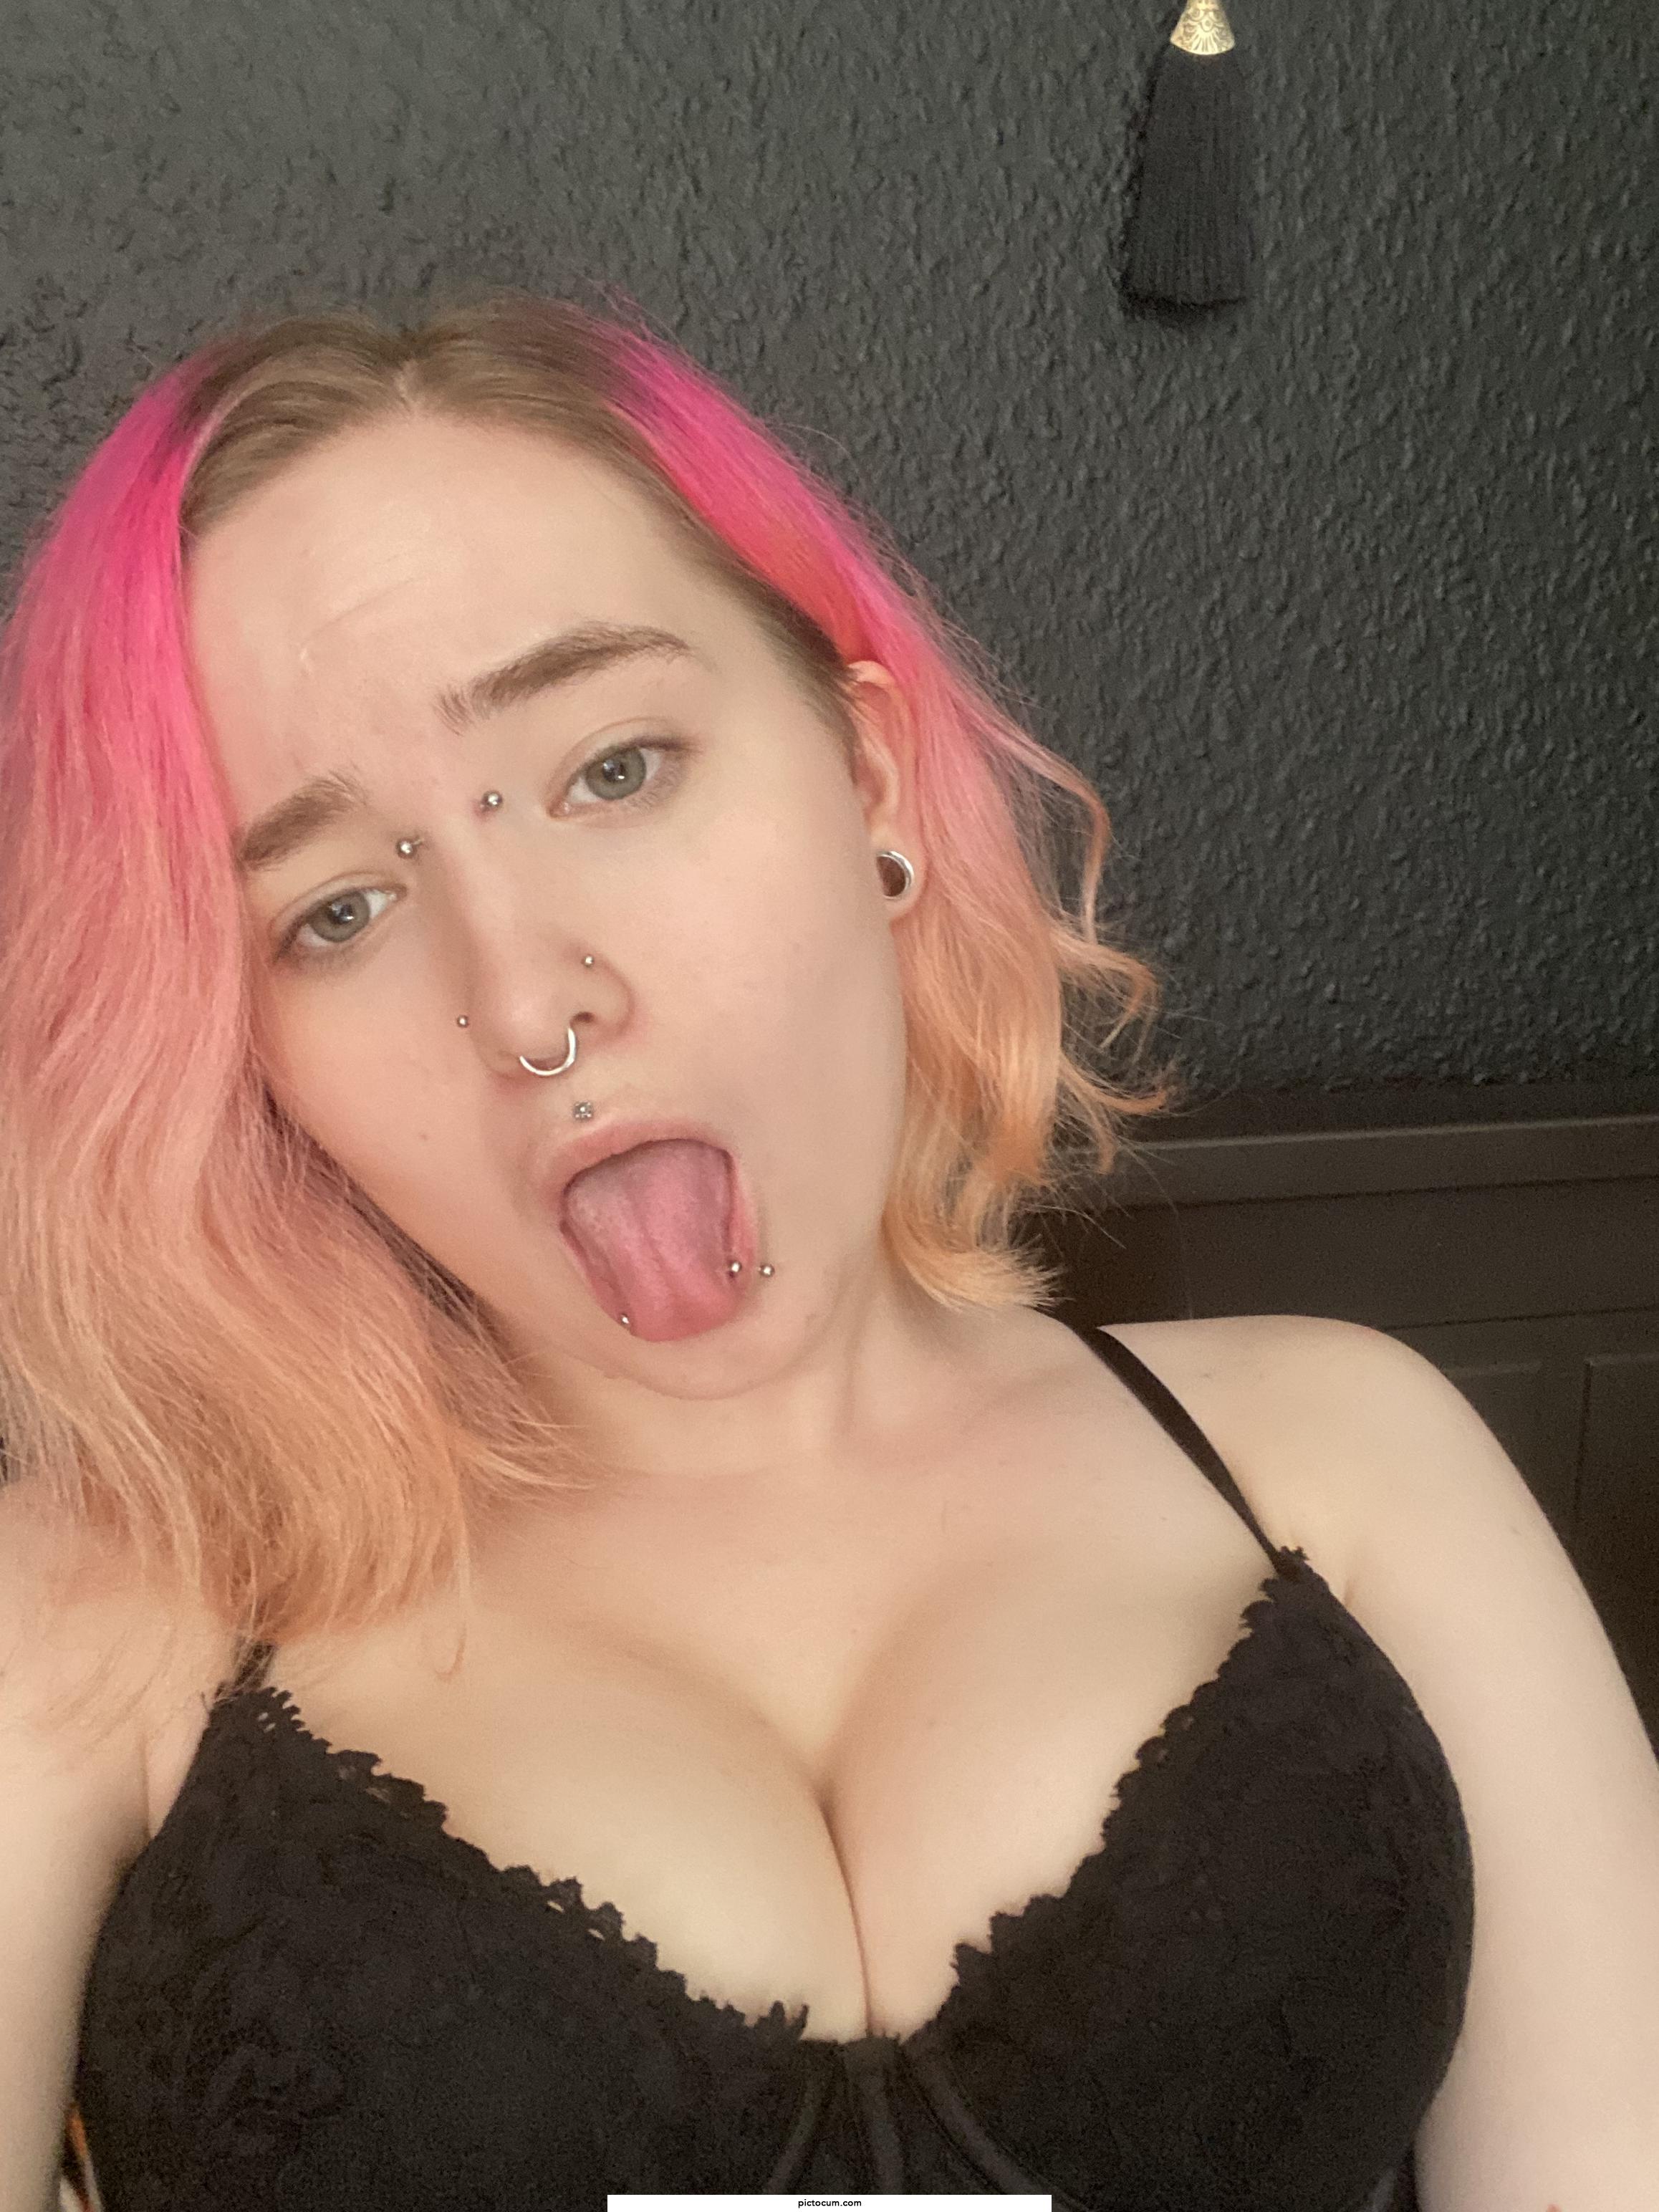 Cum in my mouth daddy